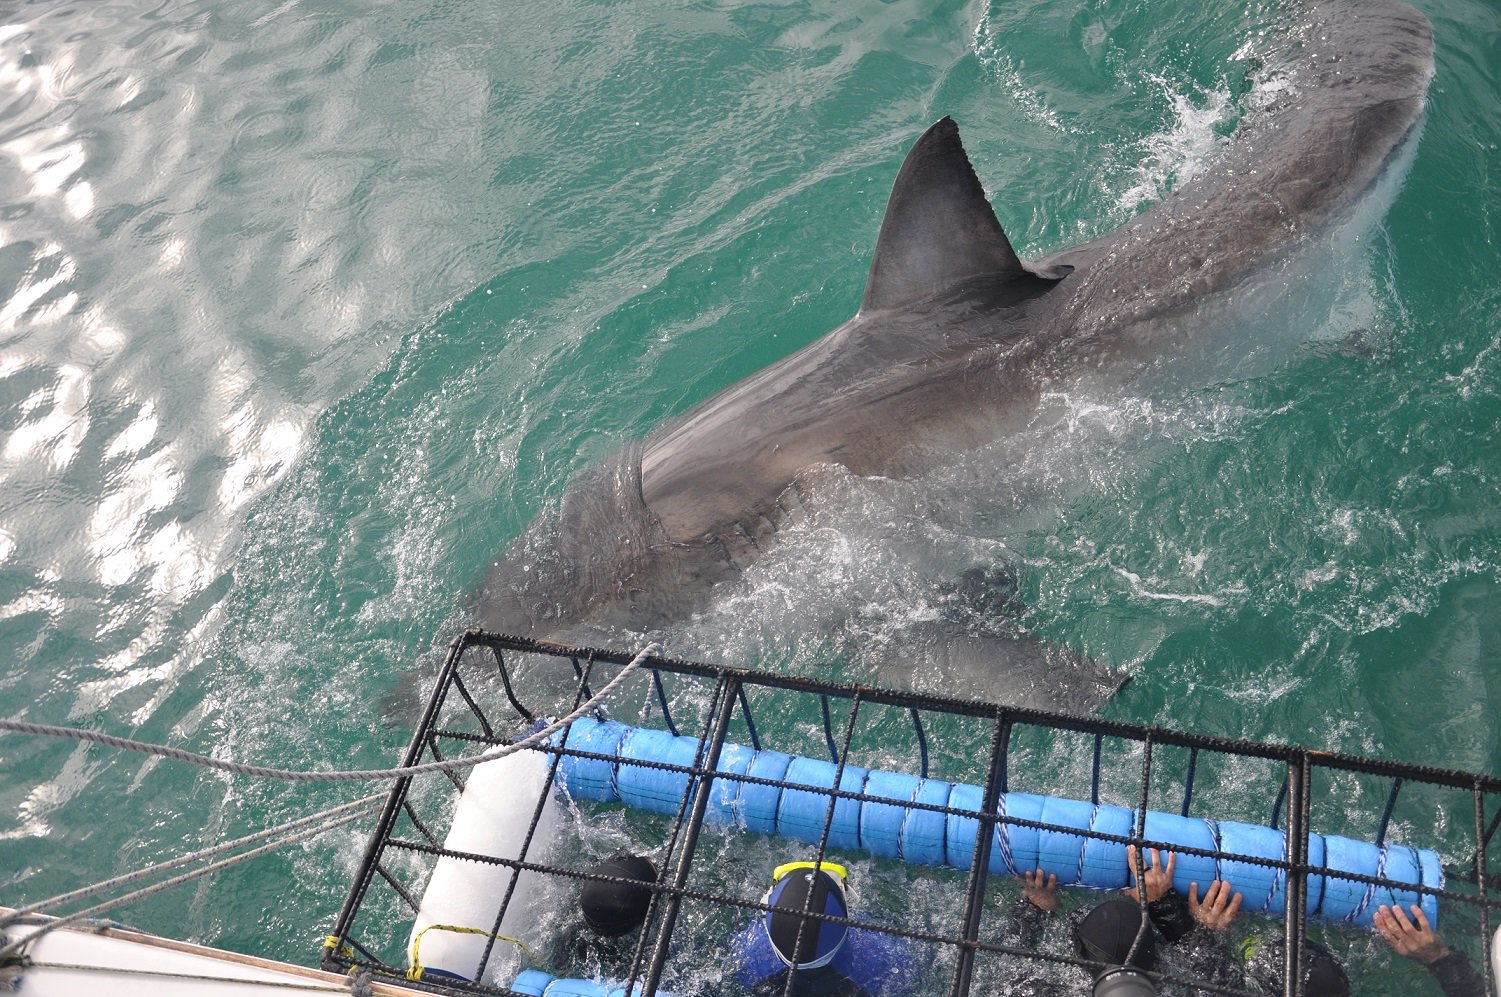 Big Great White Shark swimming past during a shark cage dive in Gansbaai.